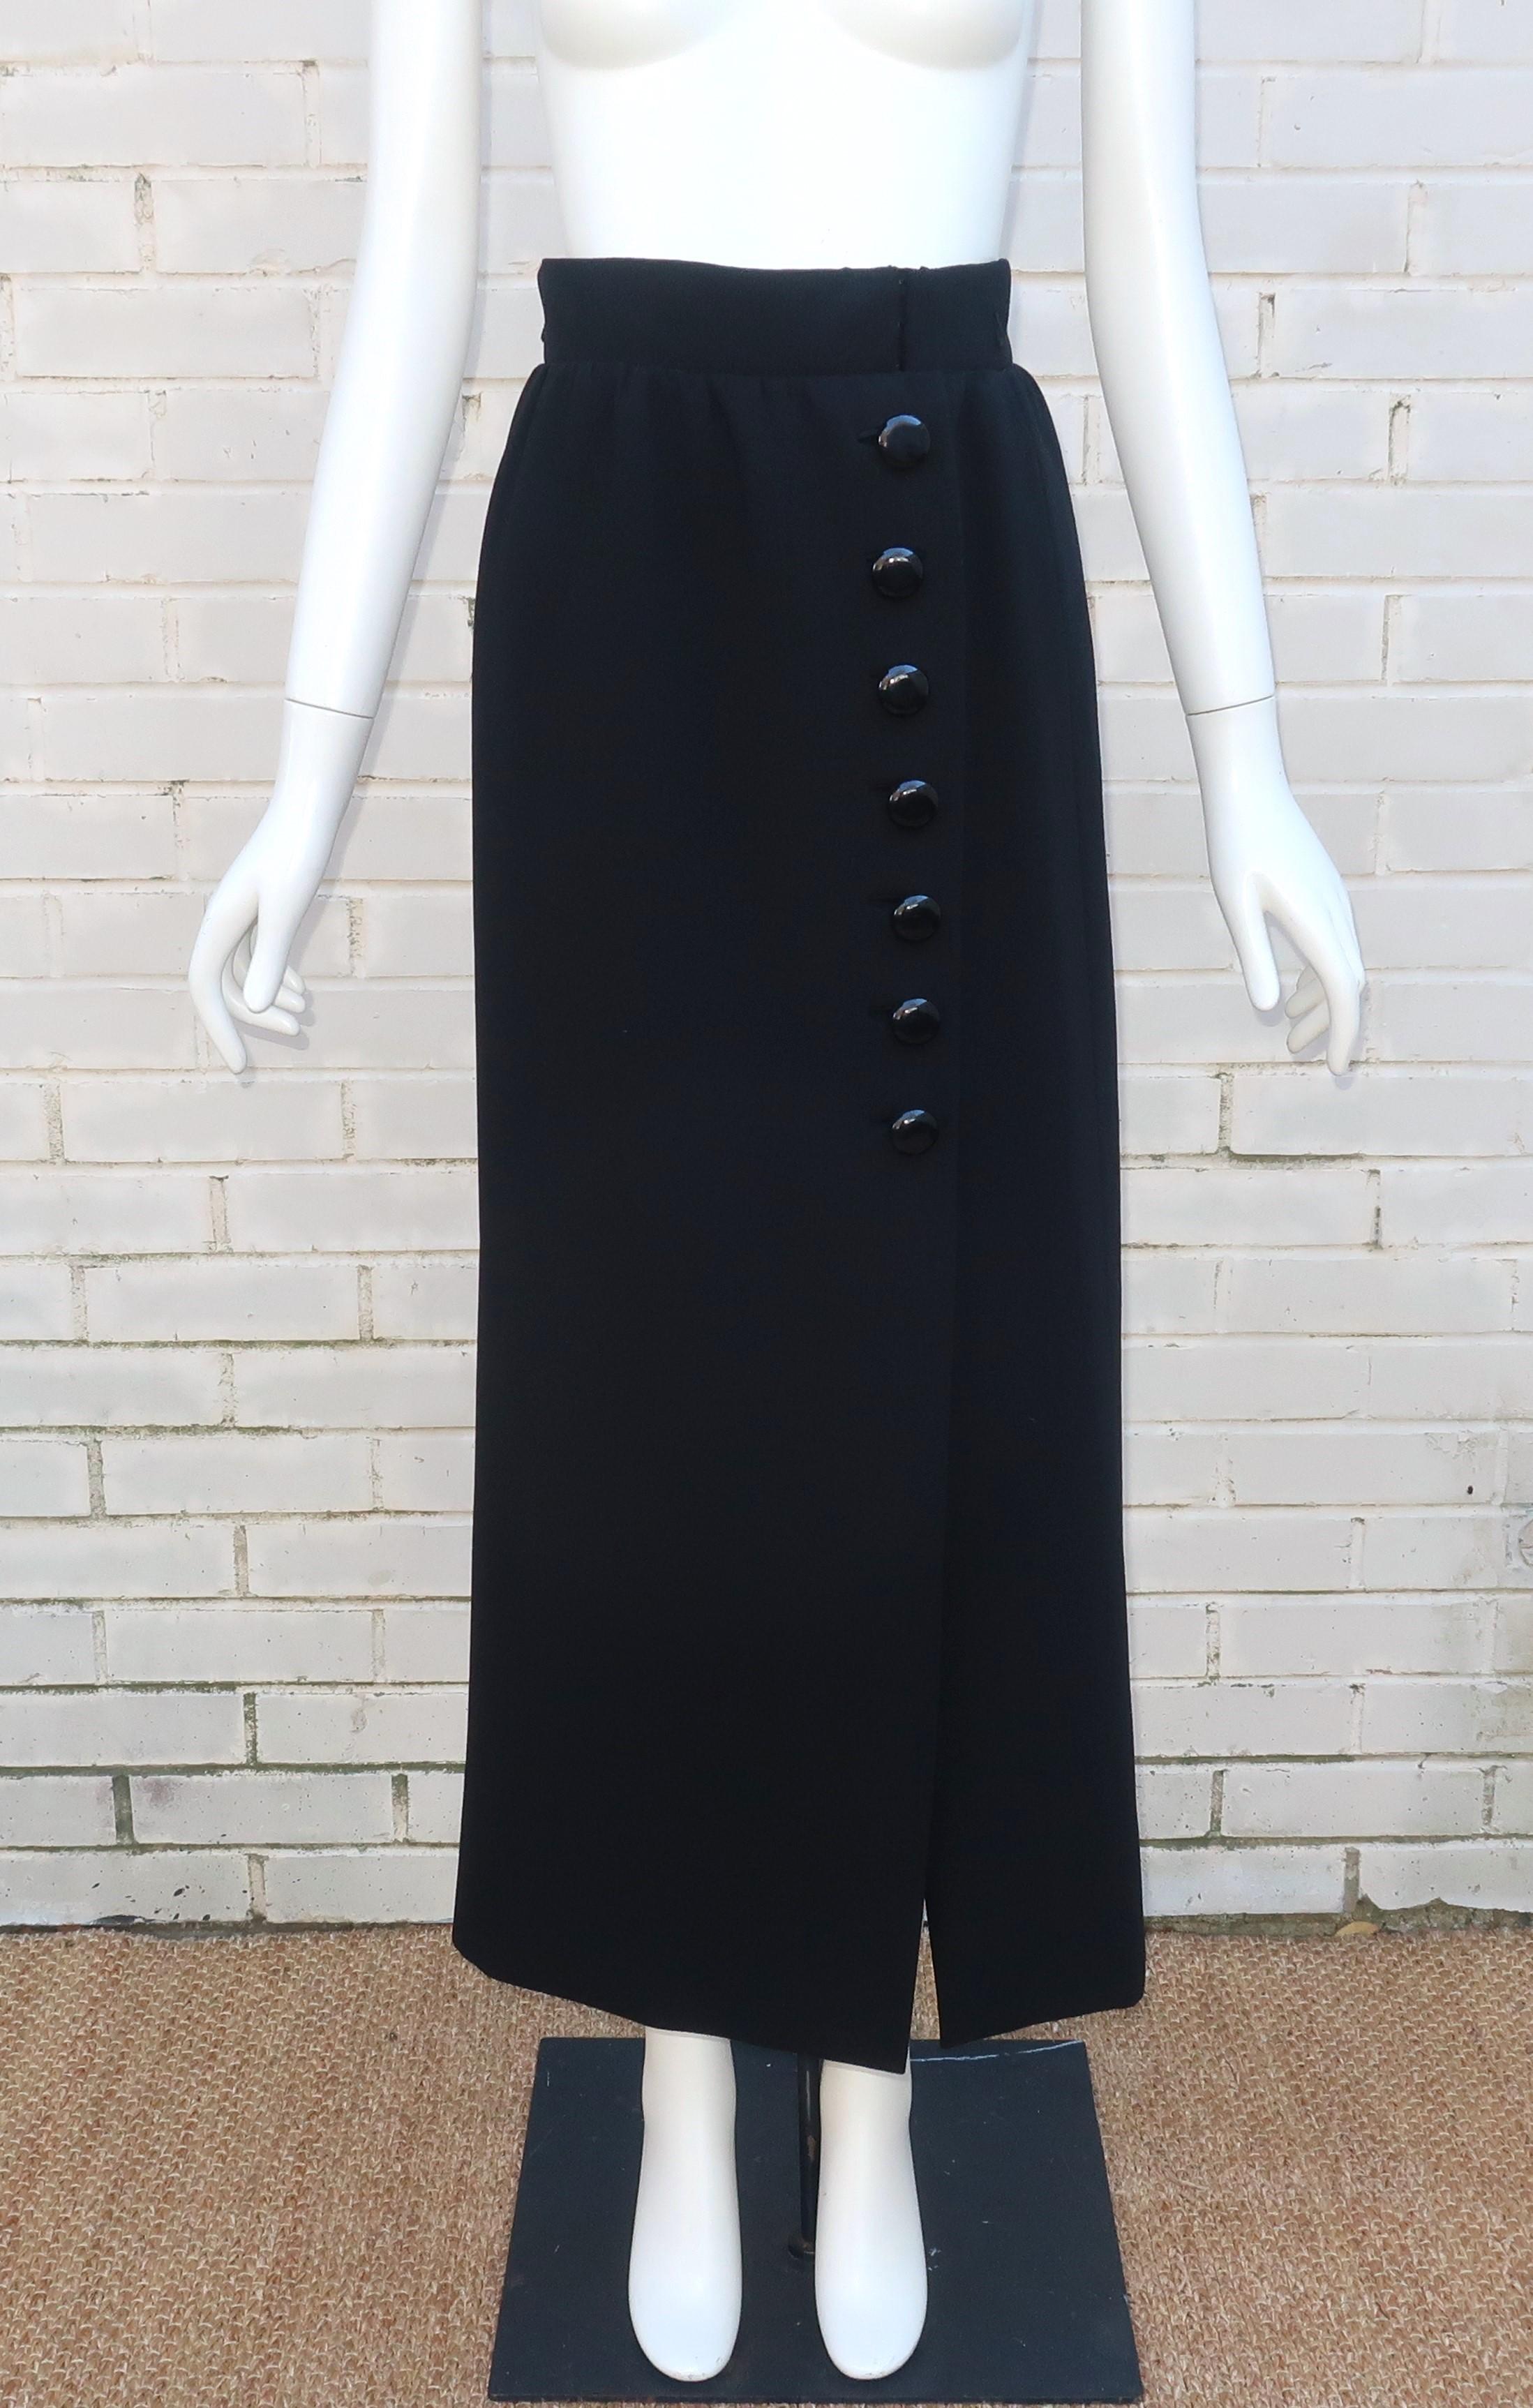 Norman Norell Belted Maxi Skirt Evening Suit With Cropped Jacket, 1968 For Sale 7